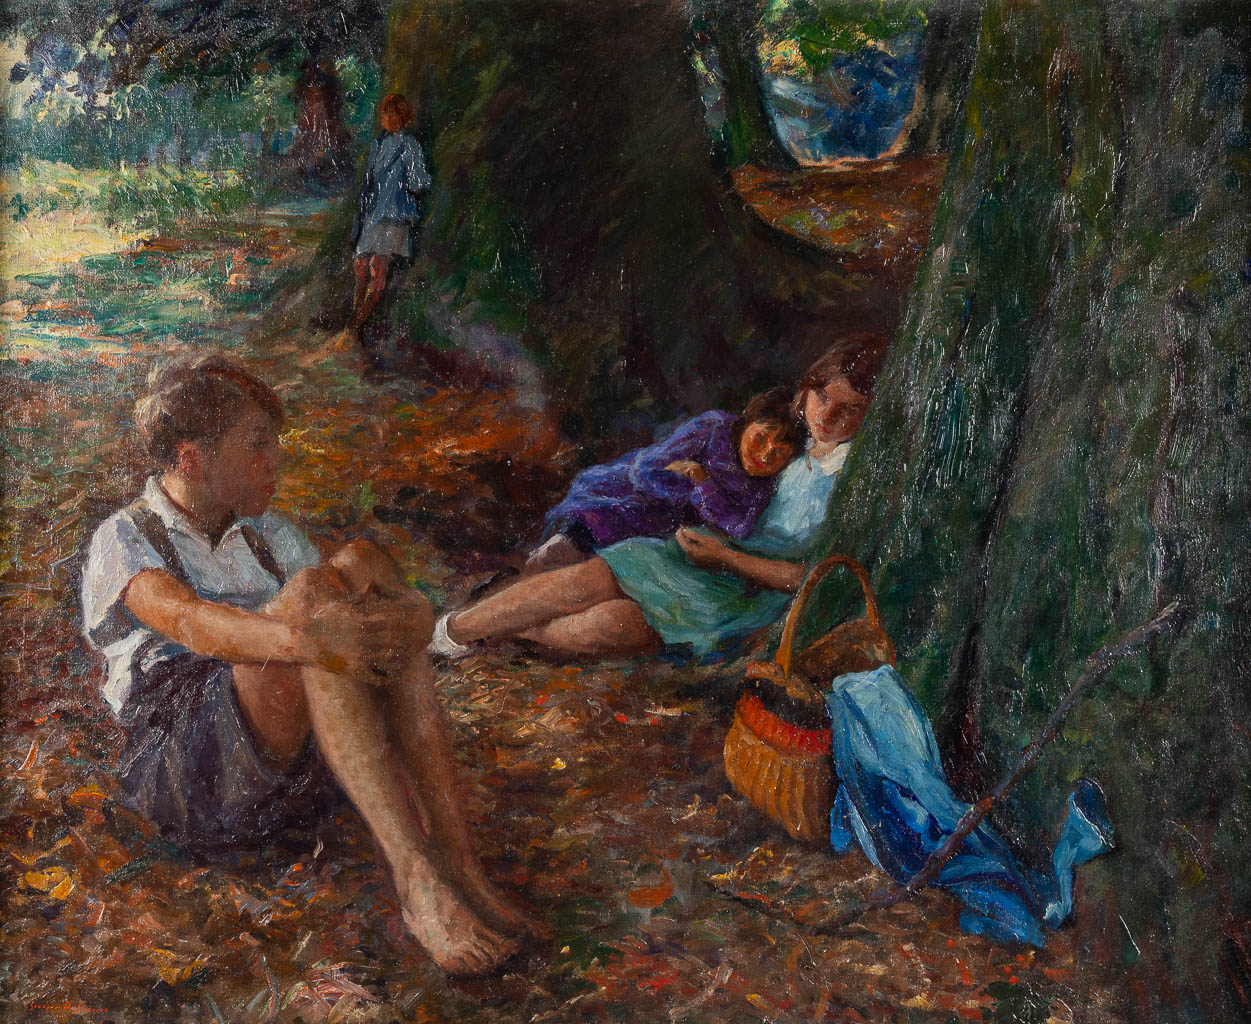 Georges DE SLOOVERE (1873-1970) 'Children in Forest, Bruges', oil on canvas. (W:100 x H:80 cm)